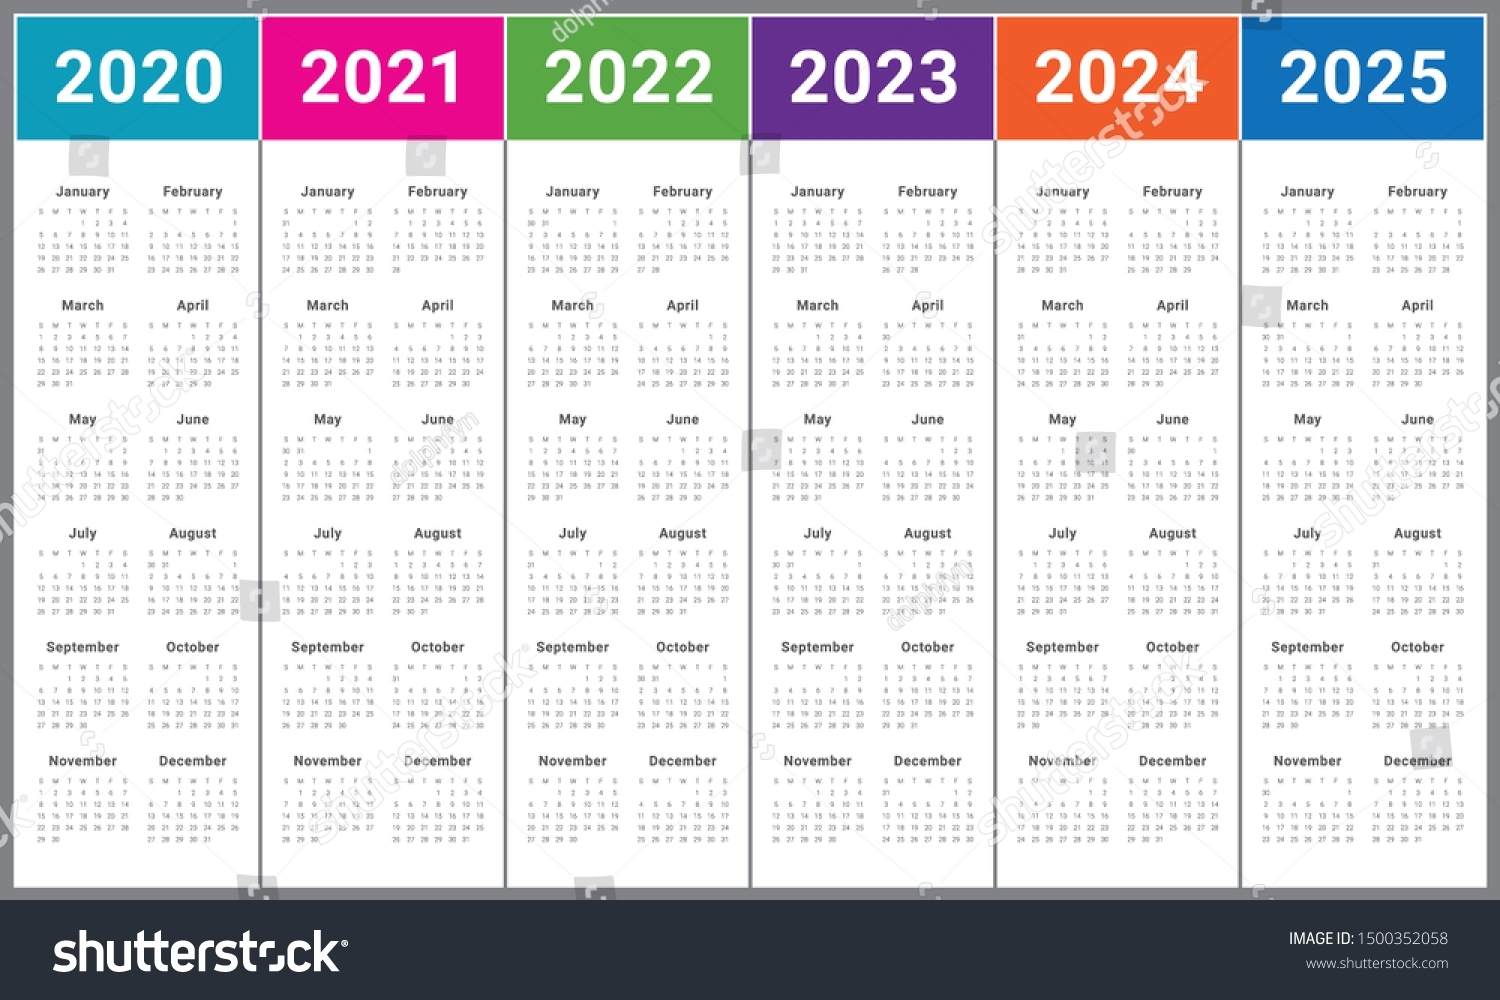 Free Printable Blank Calendars For 2021 2022 2023 2024 2025 | Month ...